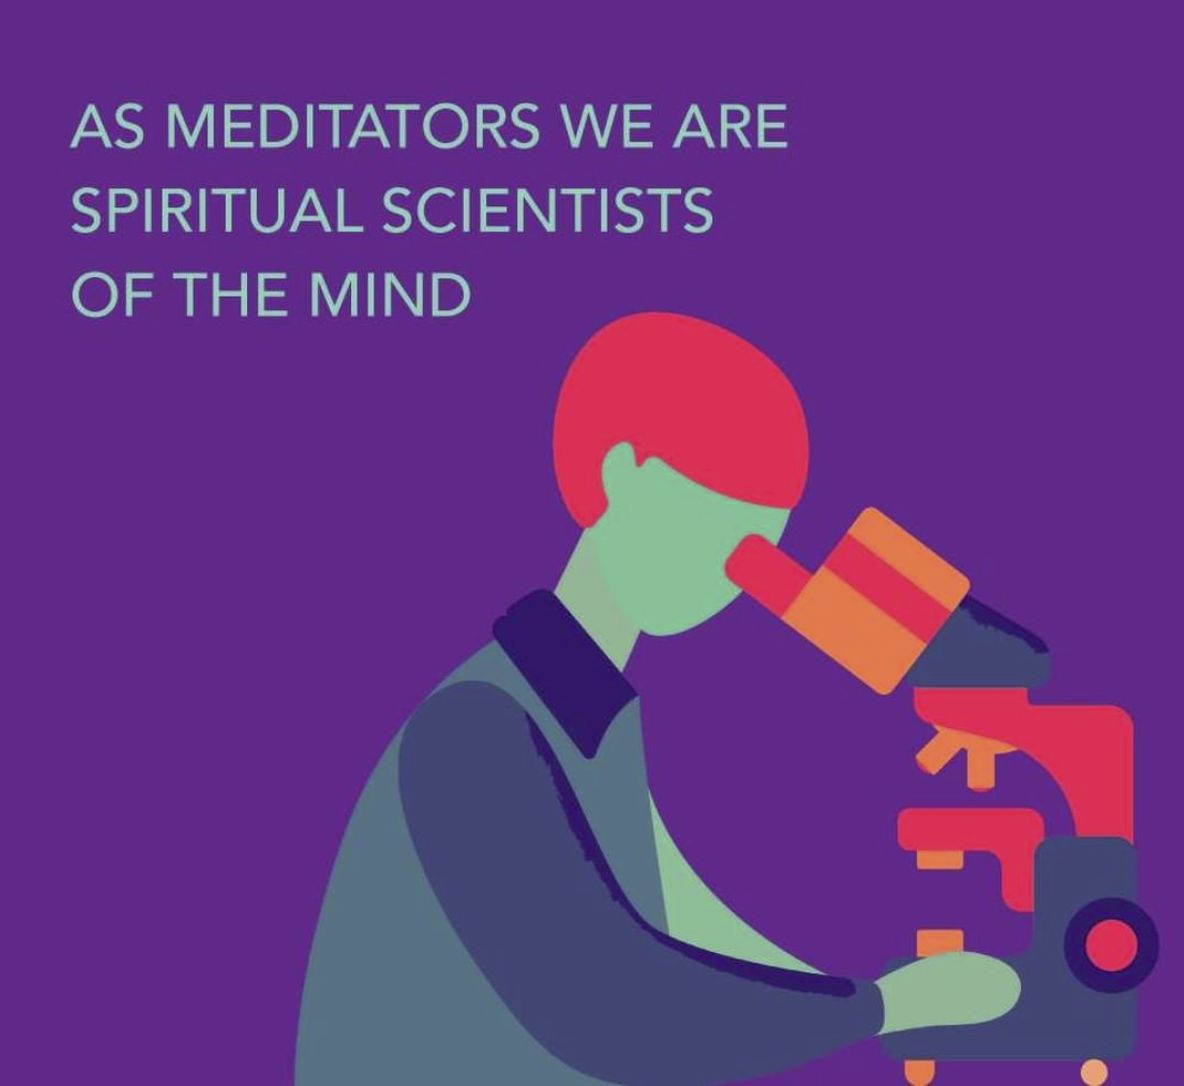 As meditators, we need to become spiritual mind scientists who engage in daily experimentation with our mind. We can be doing this all the time by using everyday circumstances to learn about where we truly think happiness comes from.